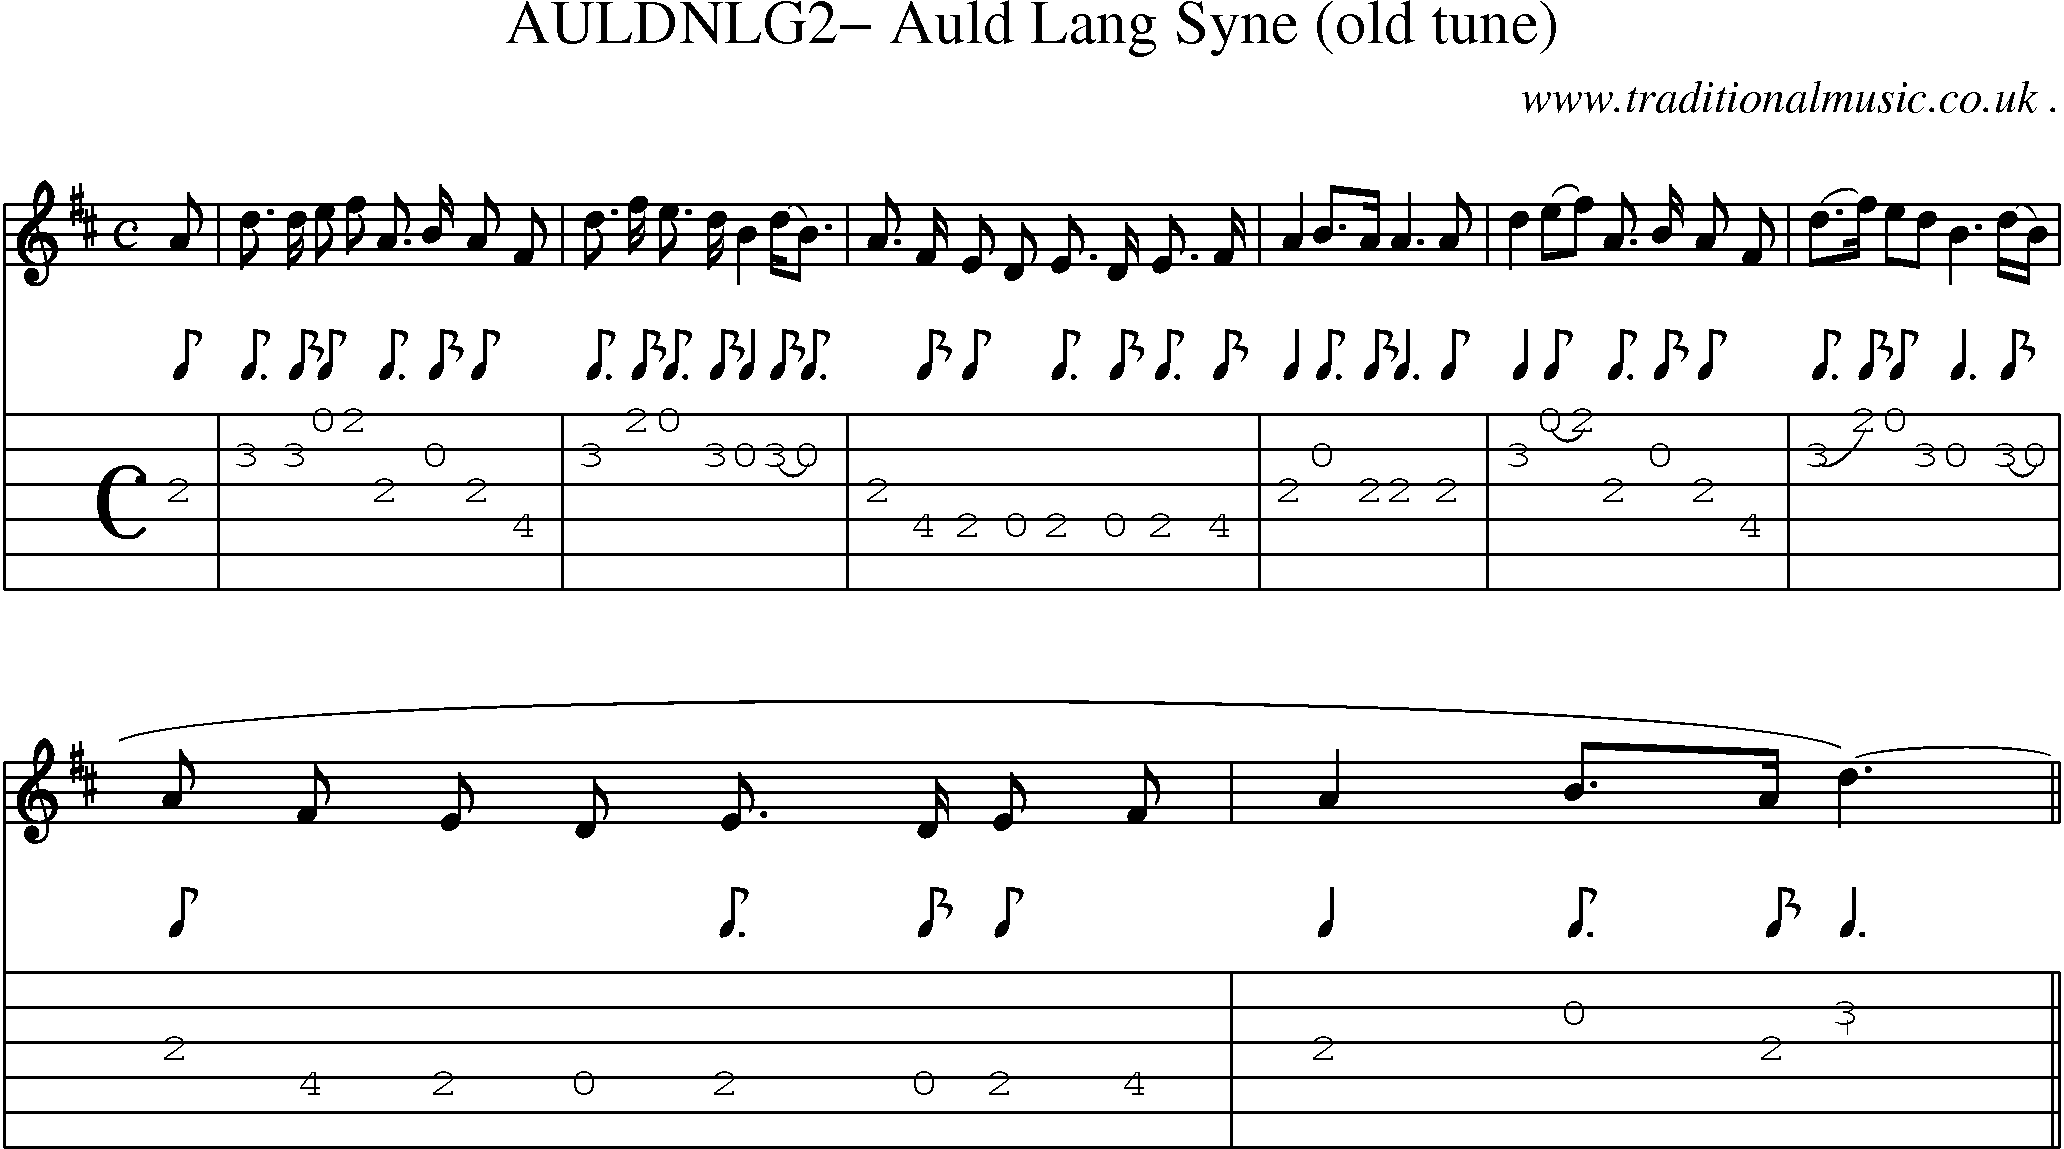 Sheet-Music and Guitar Tabs for Auldnlg2 Auld Lang Syne (old Tune)